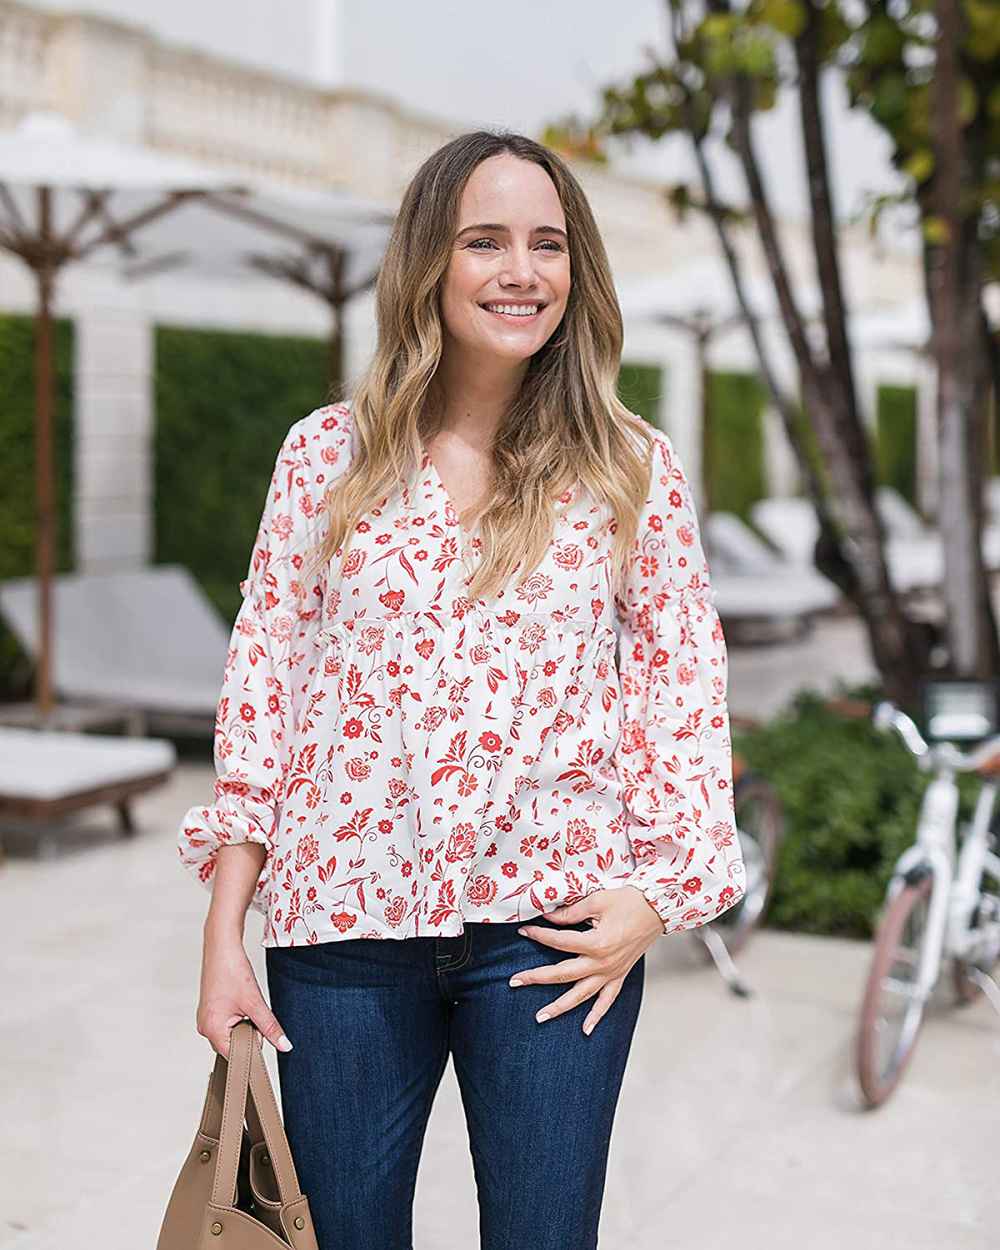 The Drop Women's Ivory Floral Print V-Neck Balloon-Sleeve Top by @graceatwood